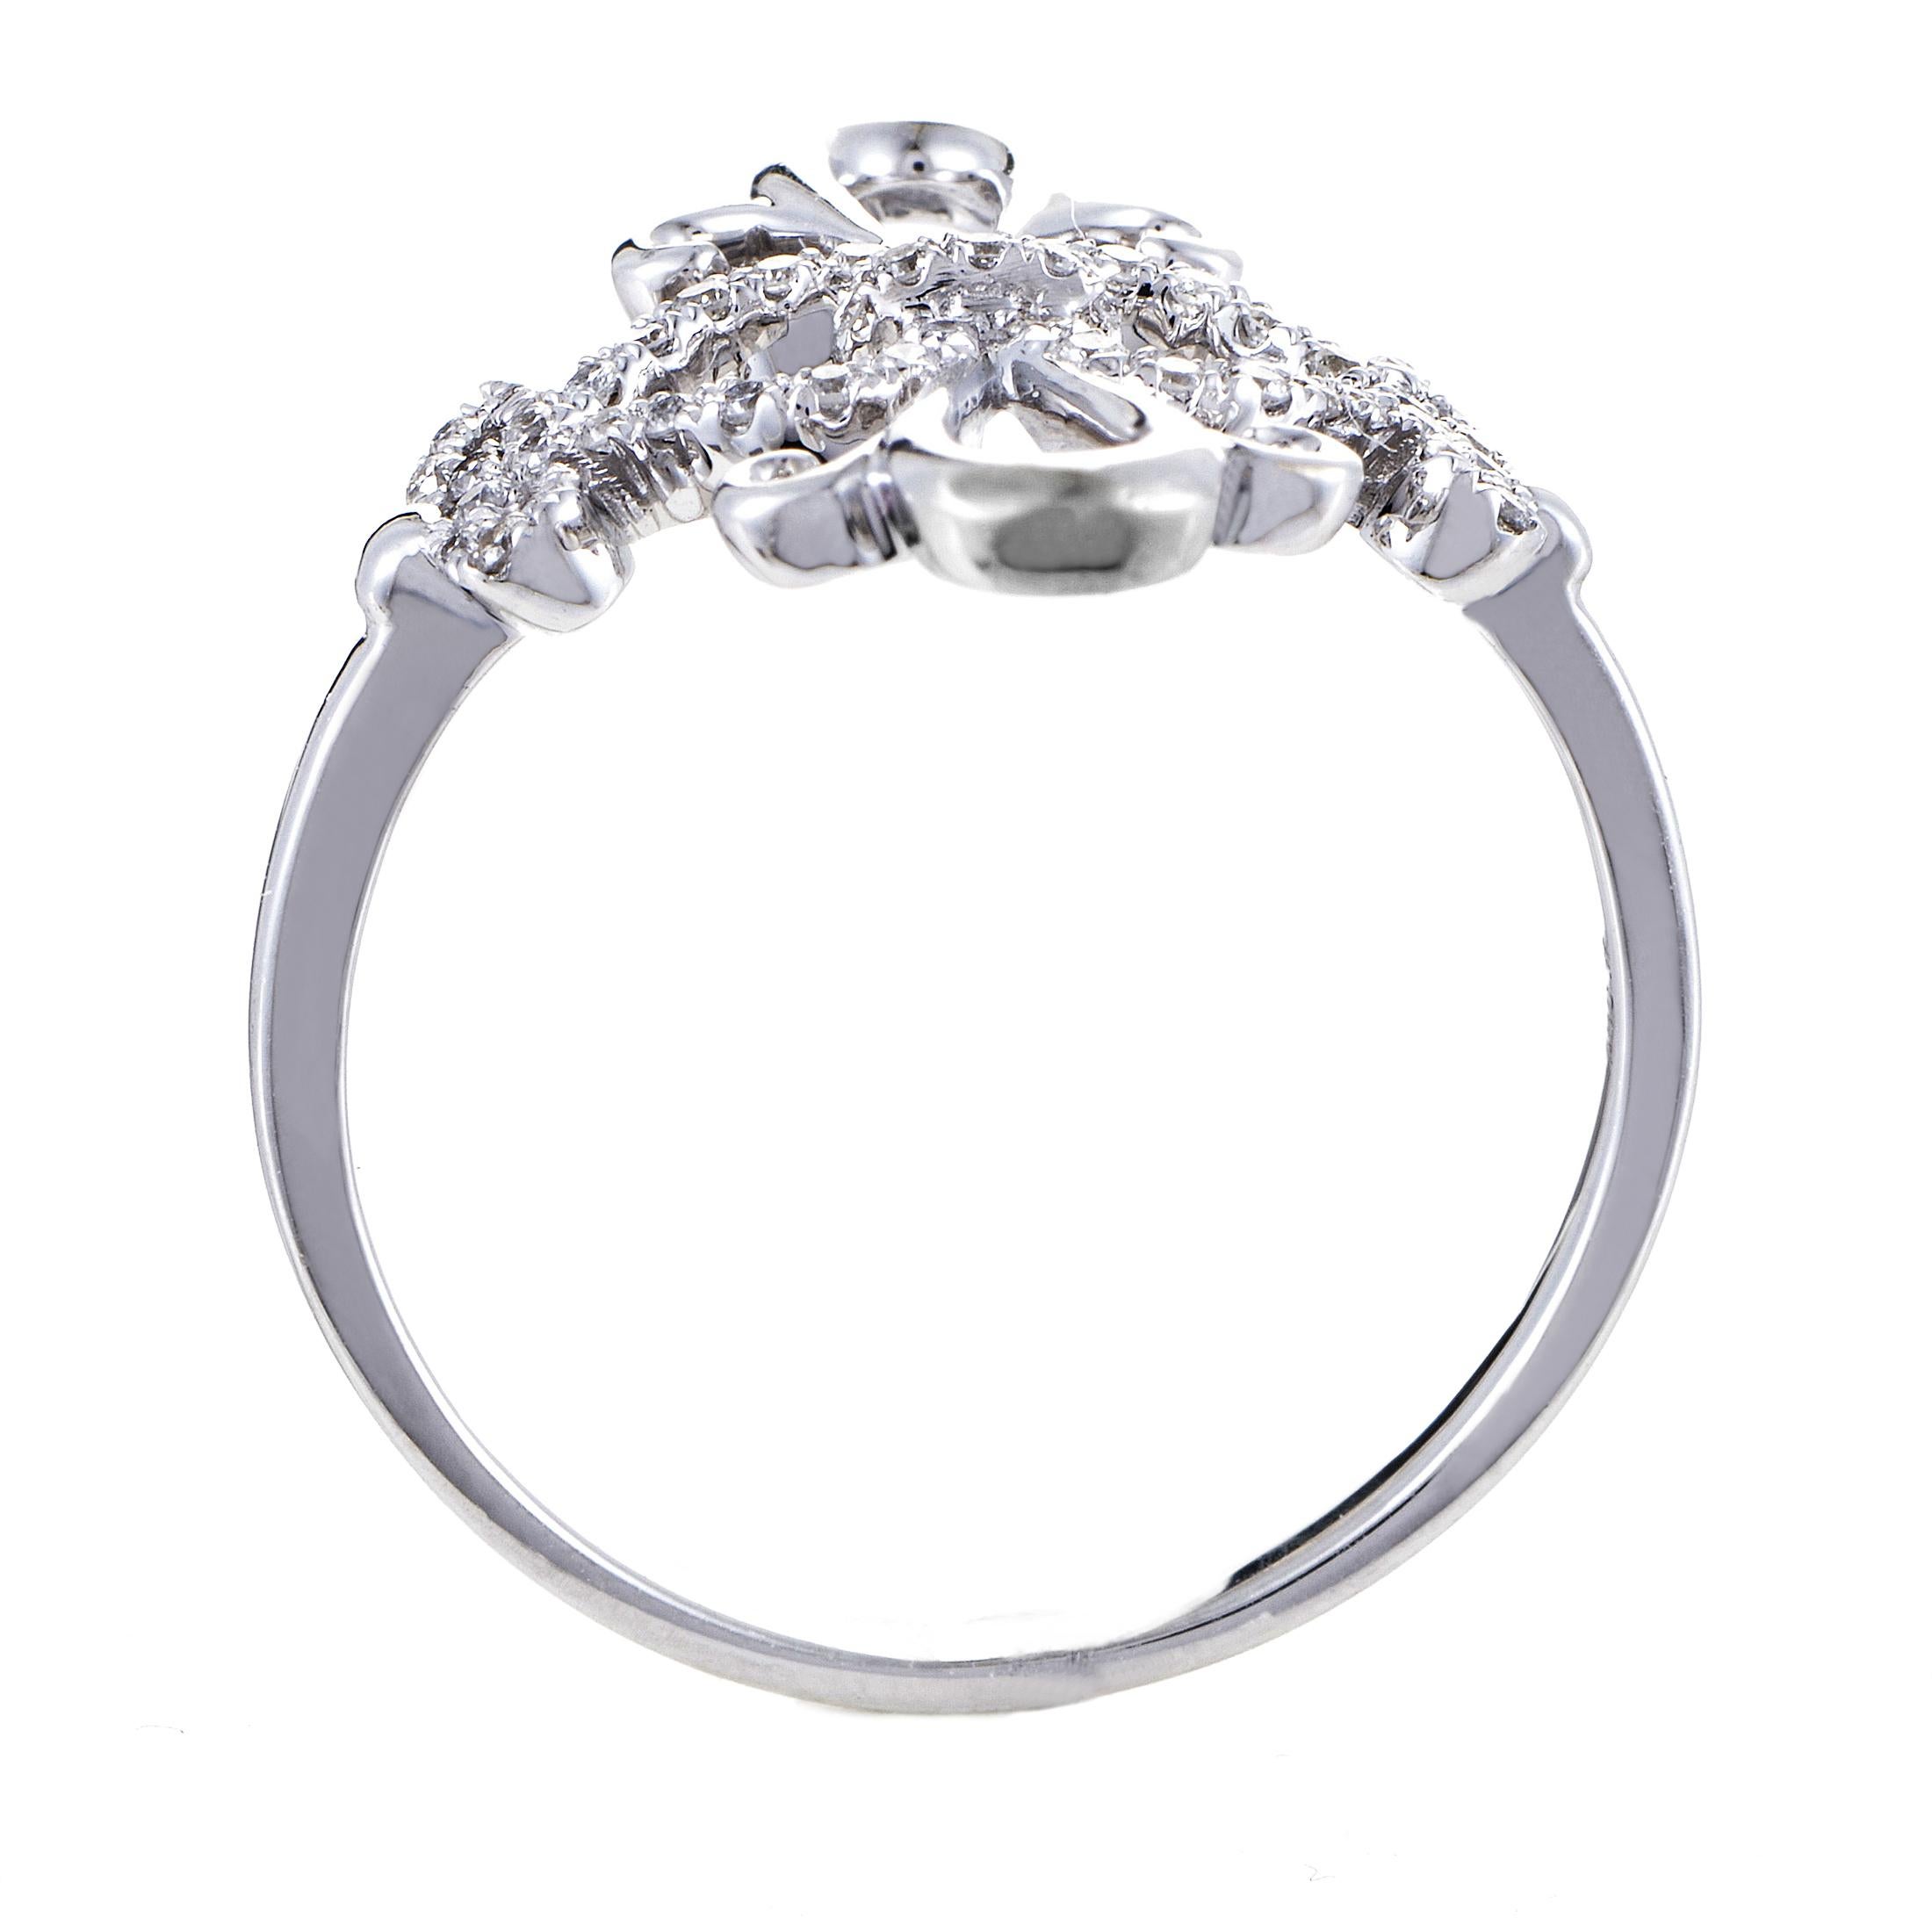 Delightful and irresistibly graceful décor combines the smooth flow and immaculate gleam of 18K white gold with prestigious resplendence of diamonds totaling 0.24ct in this fascinating and wonderfully harmonious ring.<br />Ring Top Dimensions: 17 x